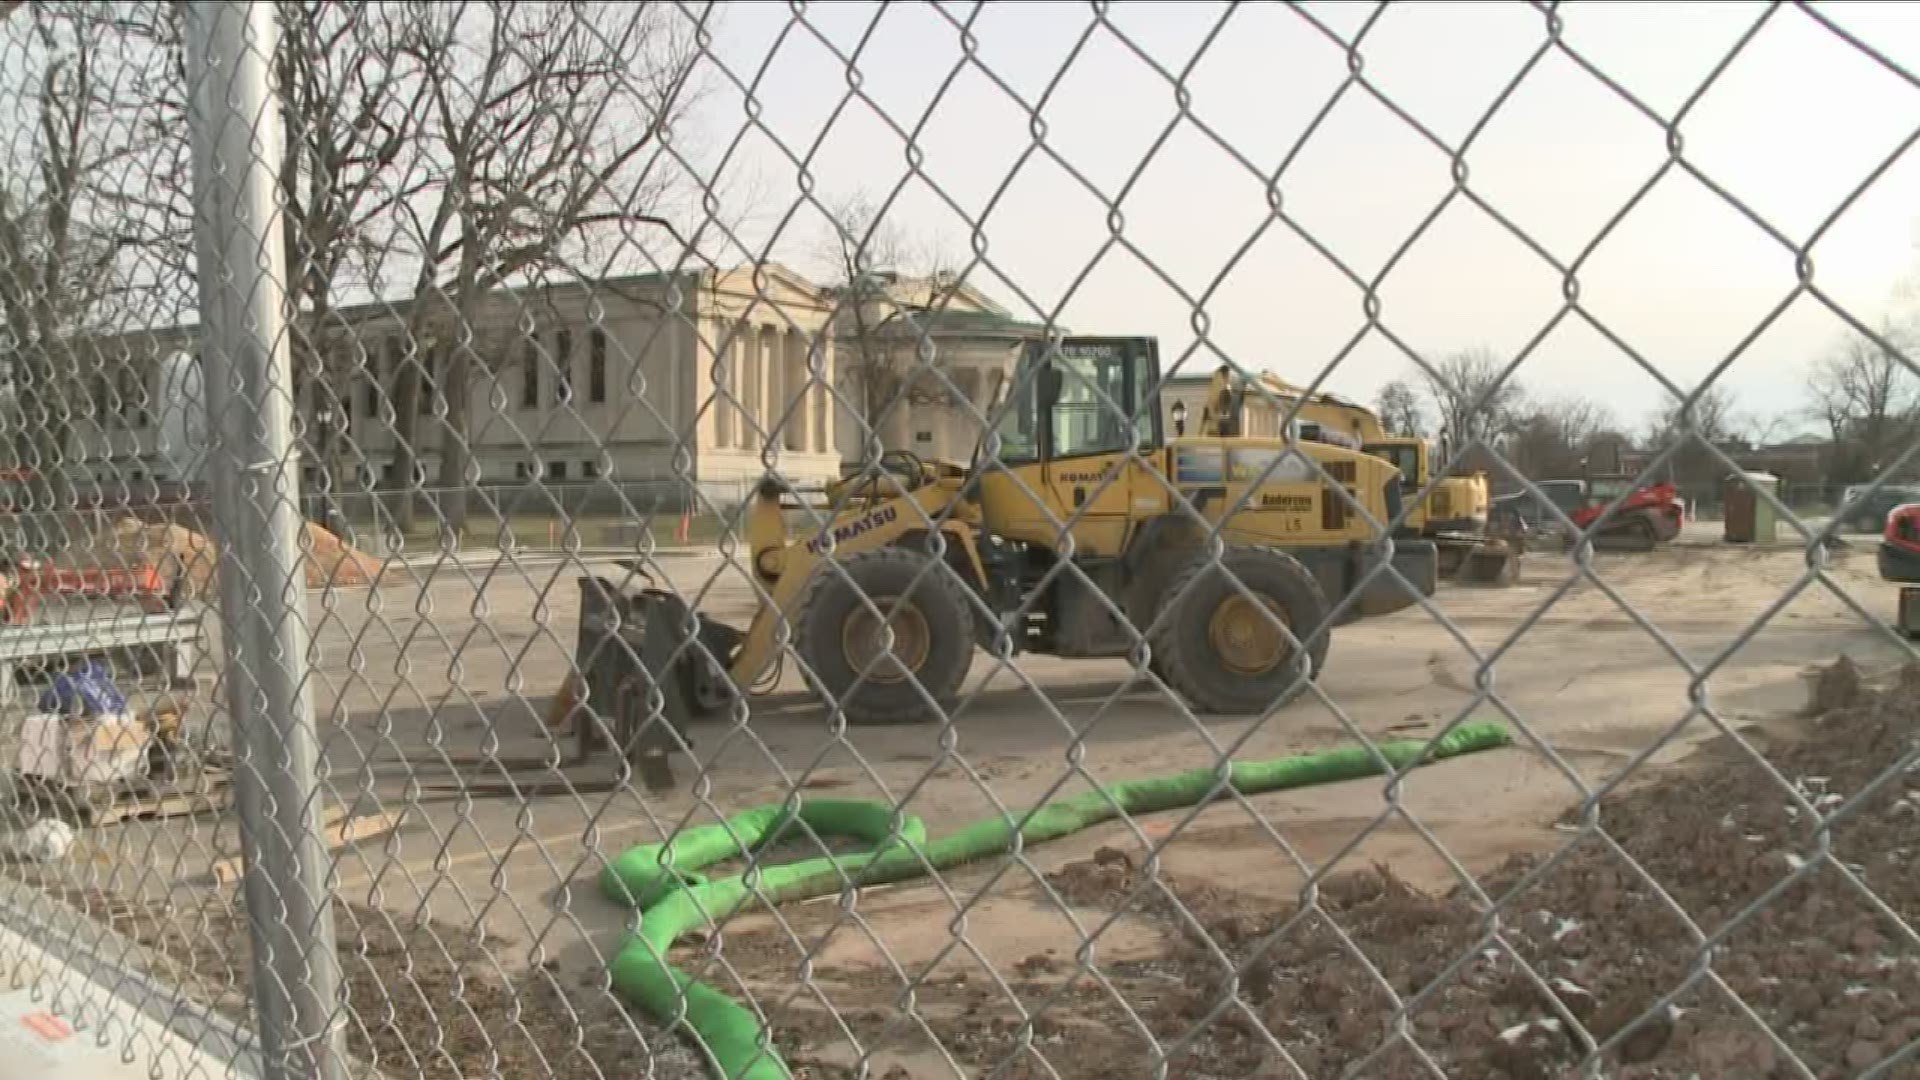 there is a gate around Albright Knox for excavation prep work